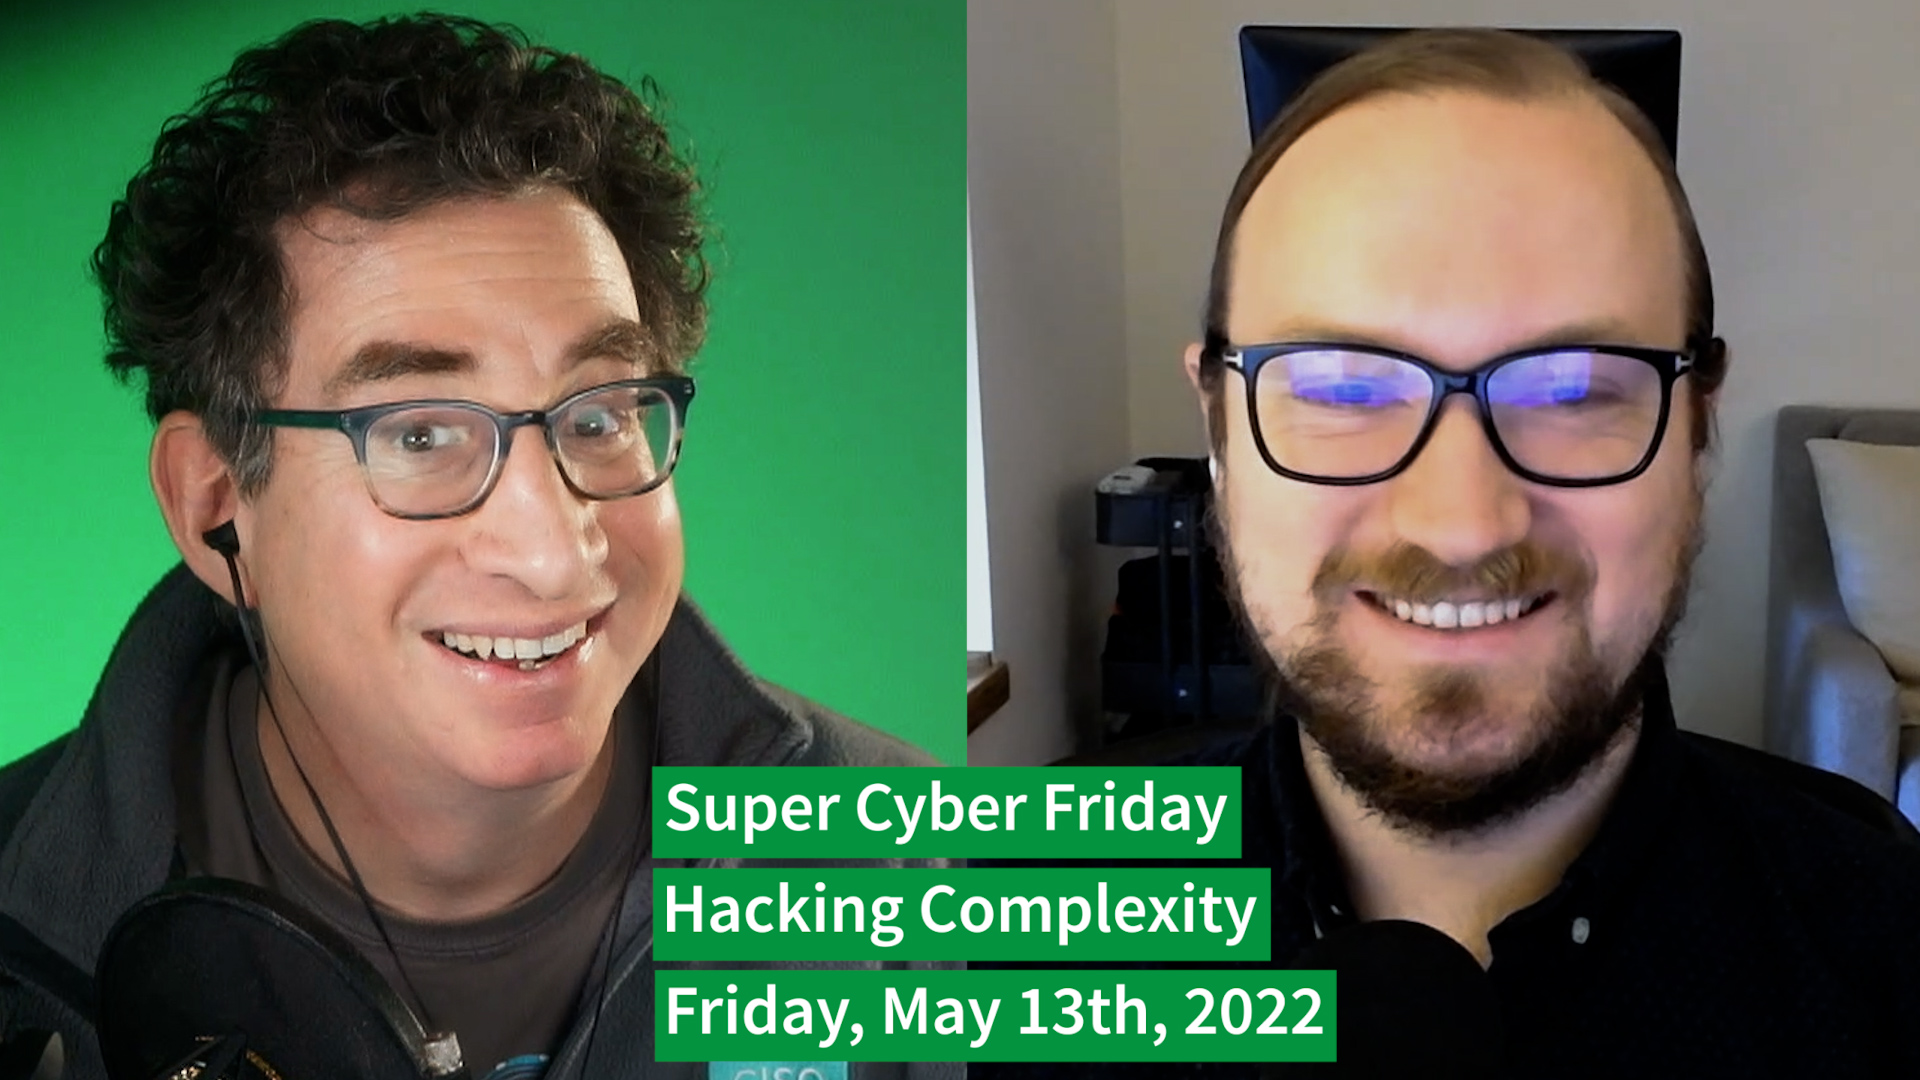 8 Explanations of Complexity in Two Minutes Super Cyber Friday CISO